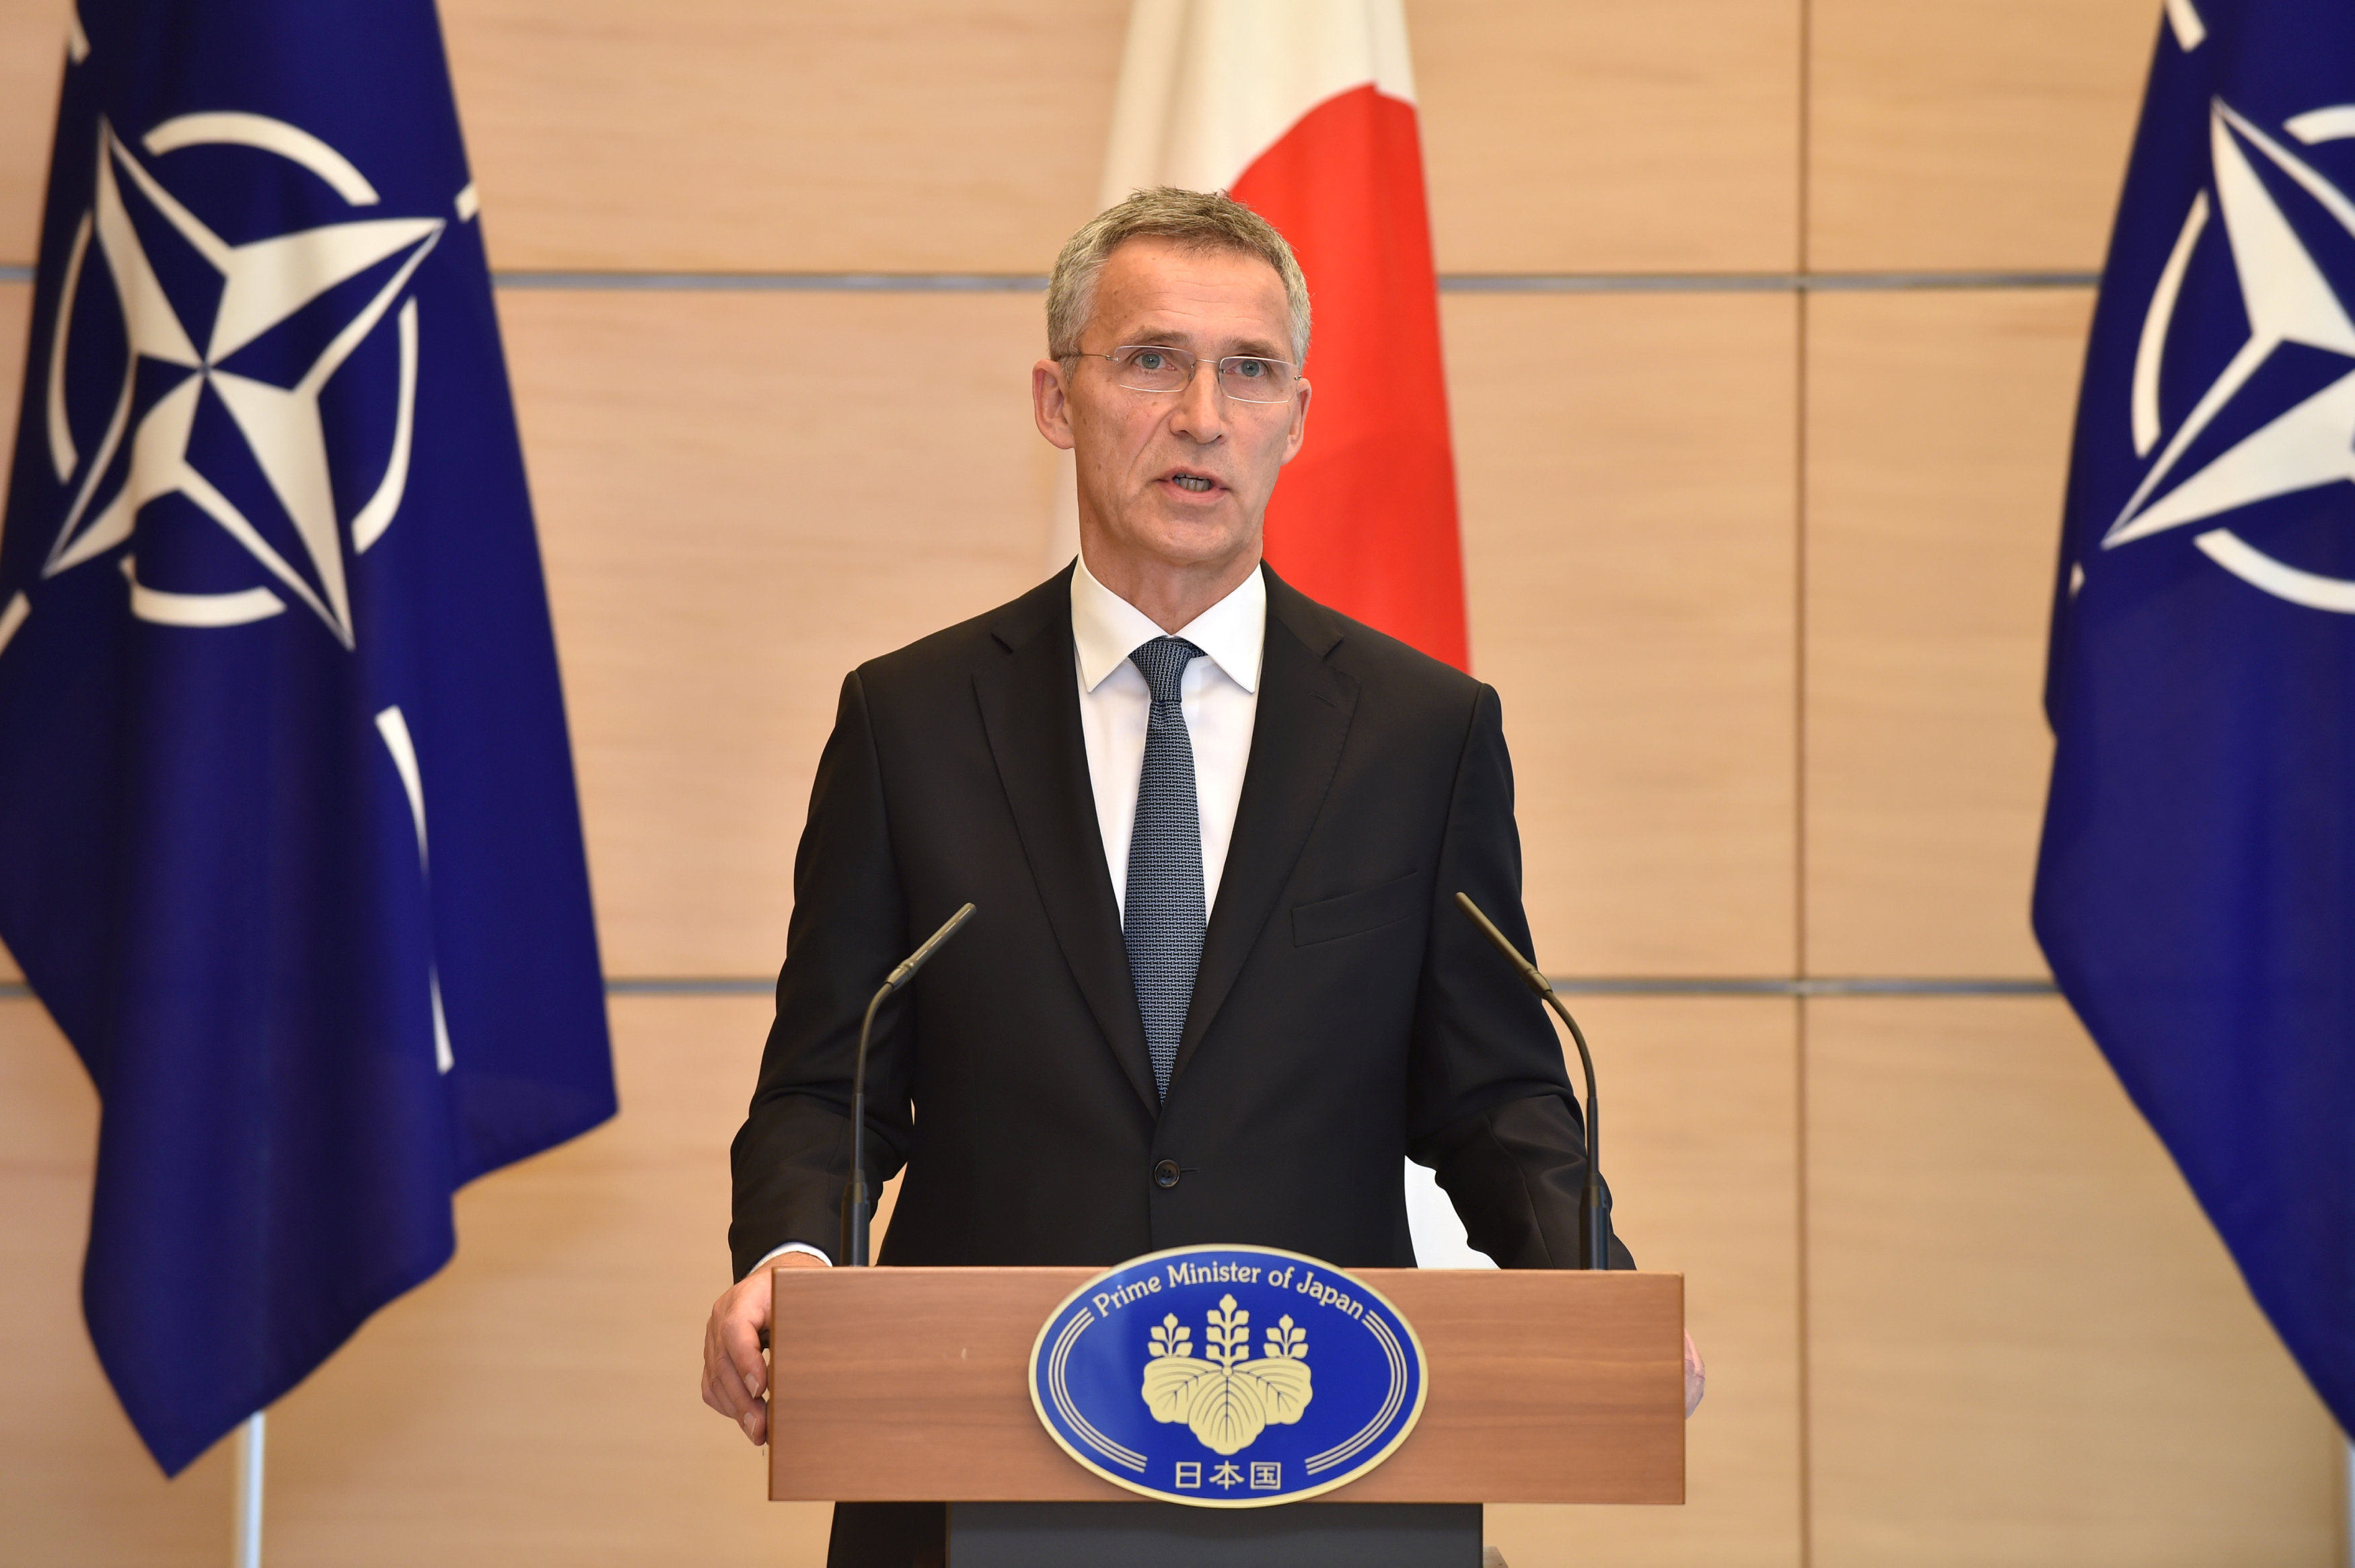 NATO chief urges full implementation of North Korean sanctions to counter global threat